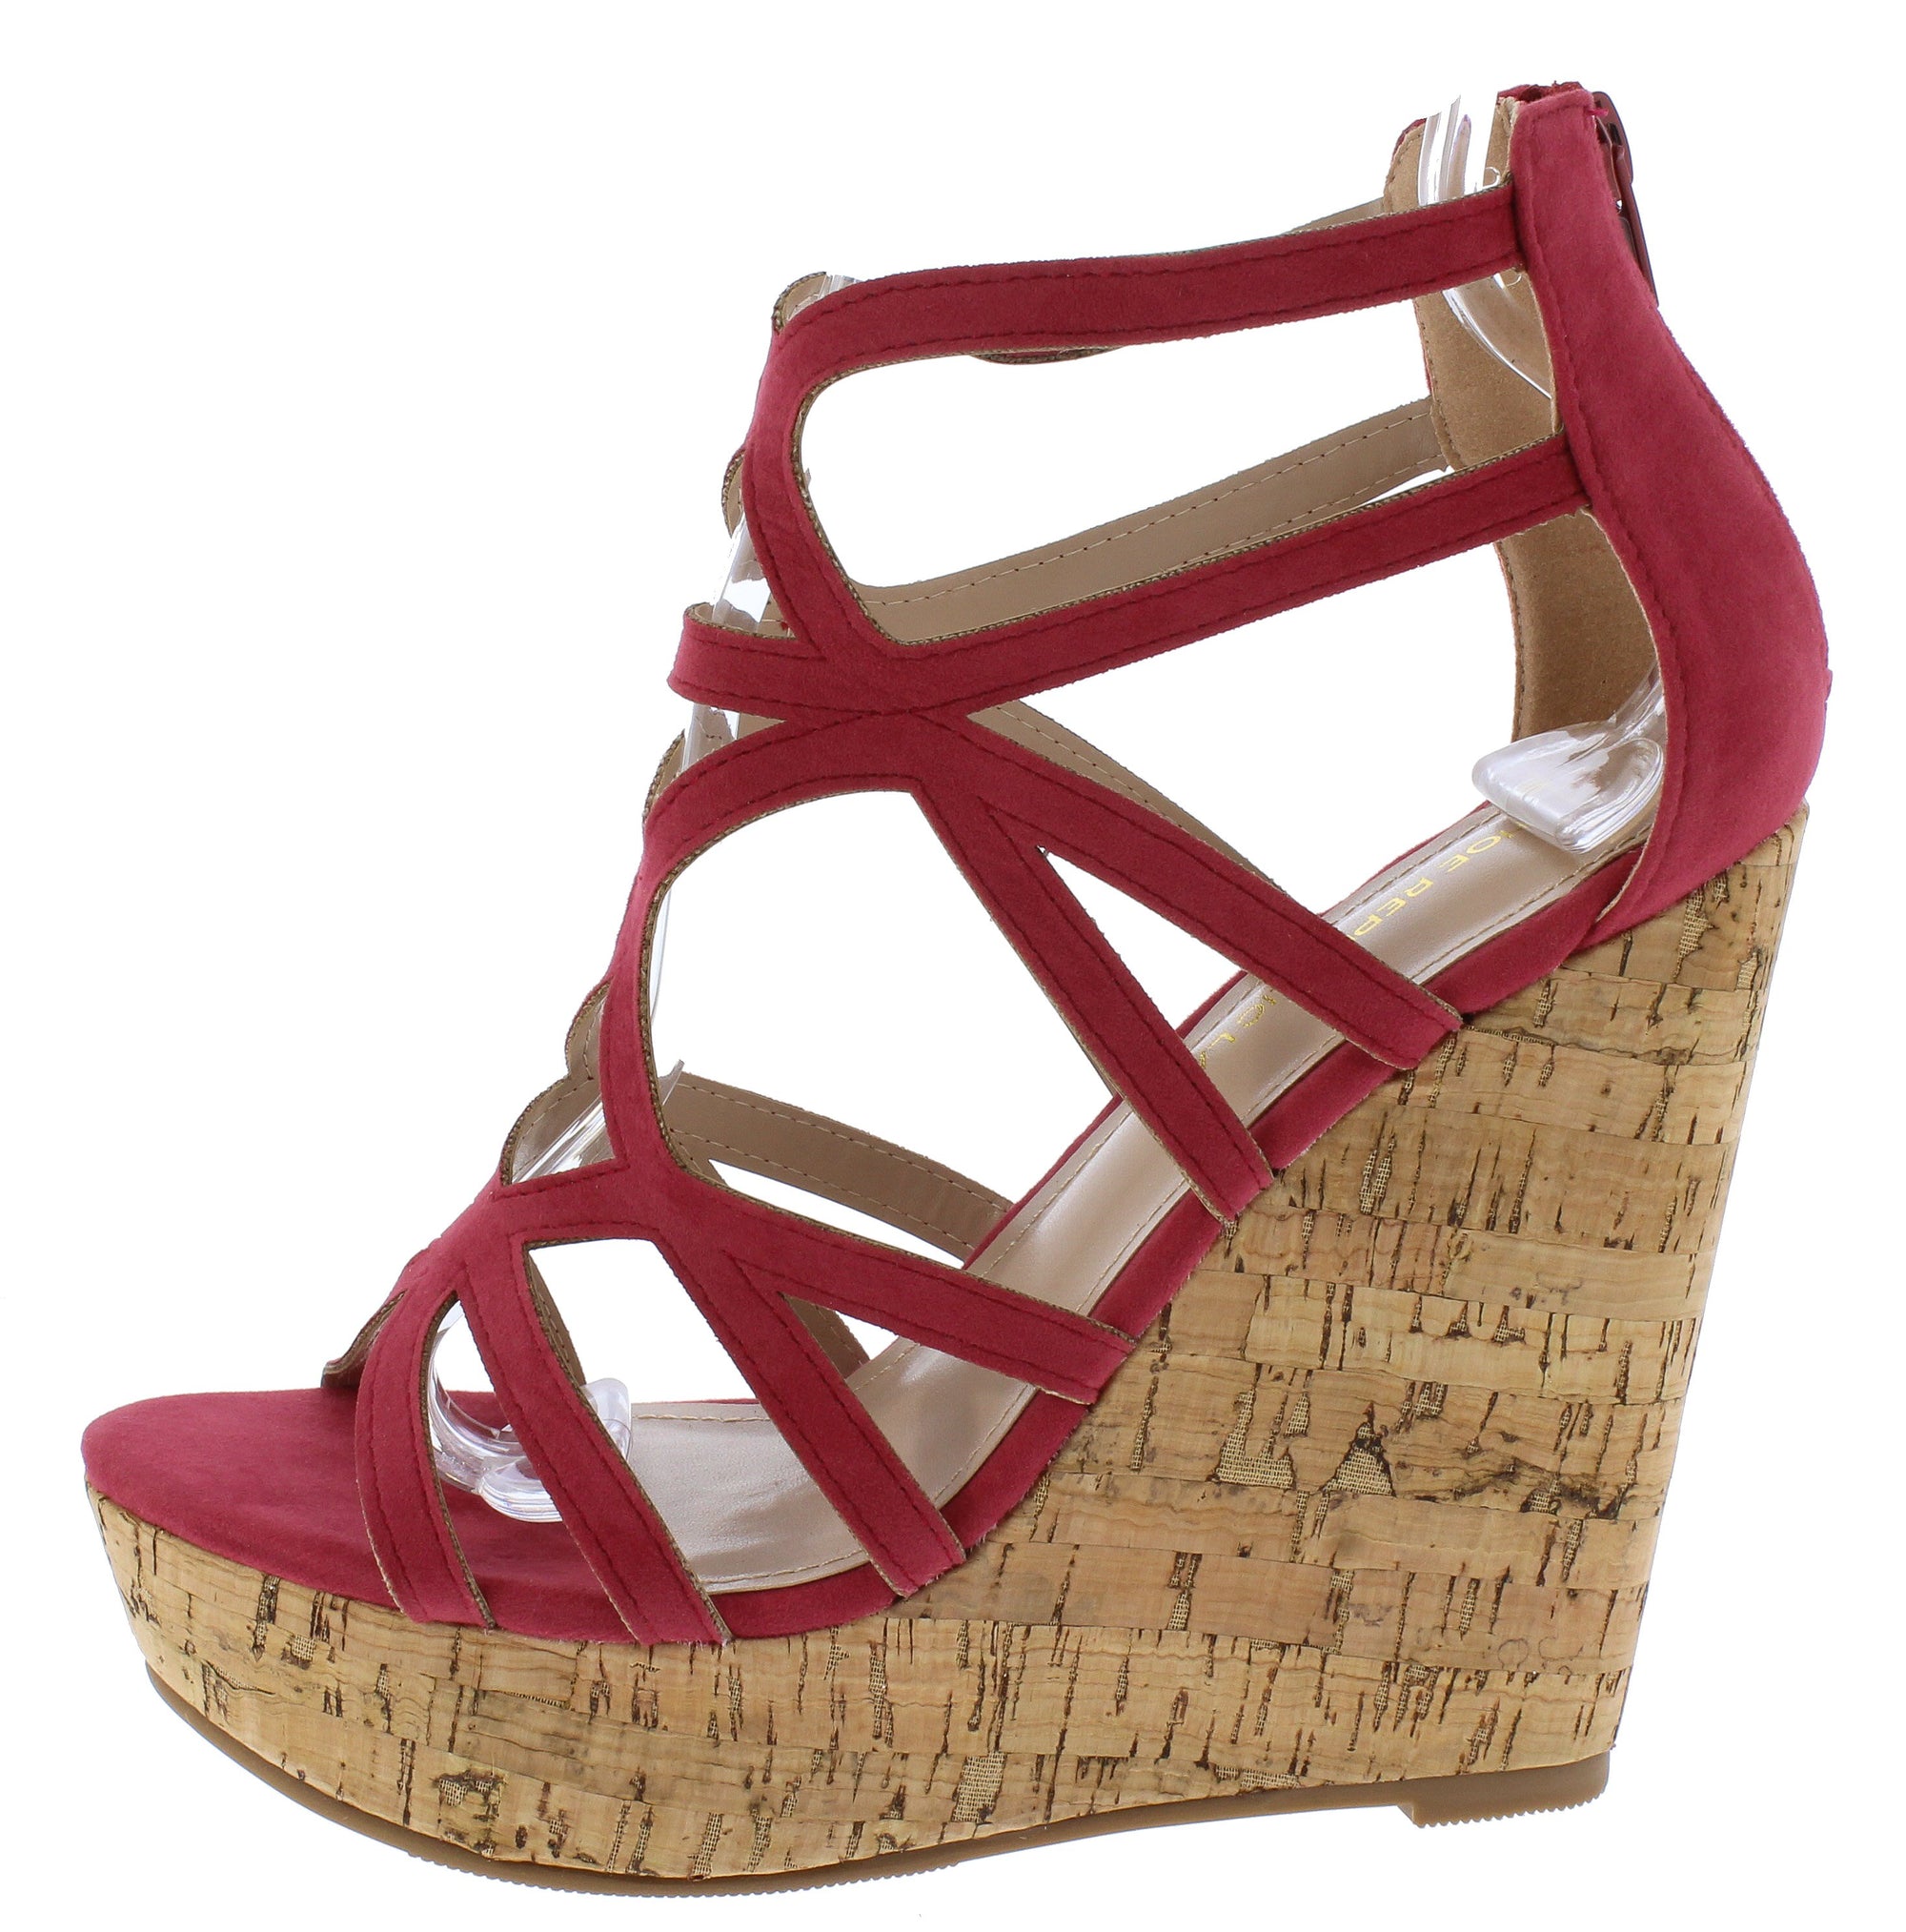 plum wedge shoes